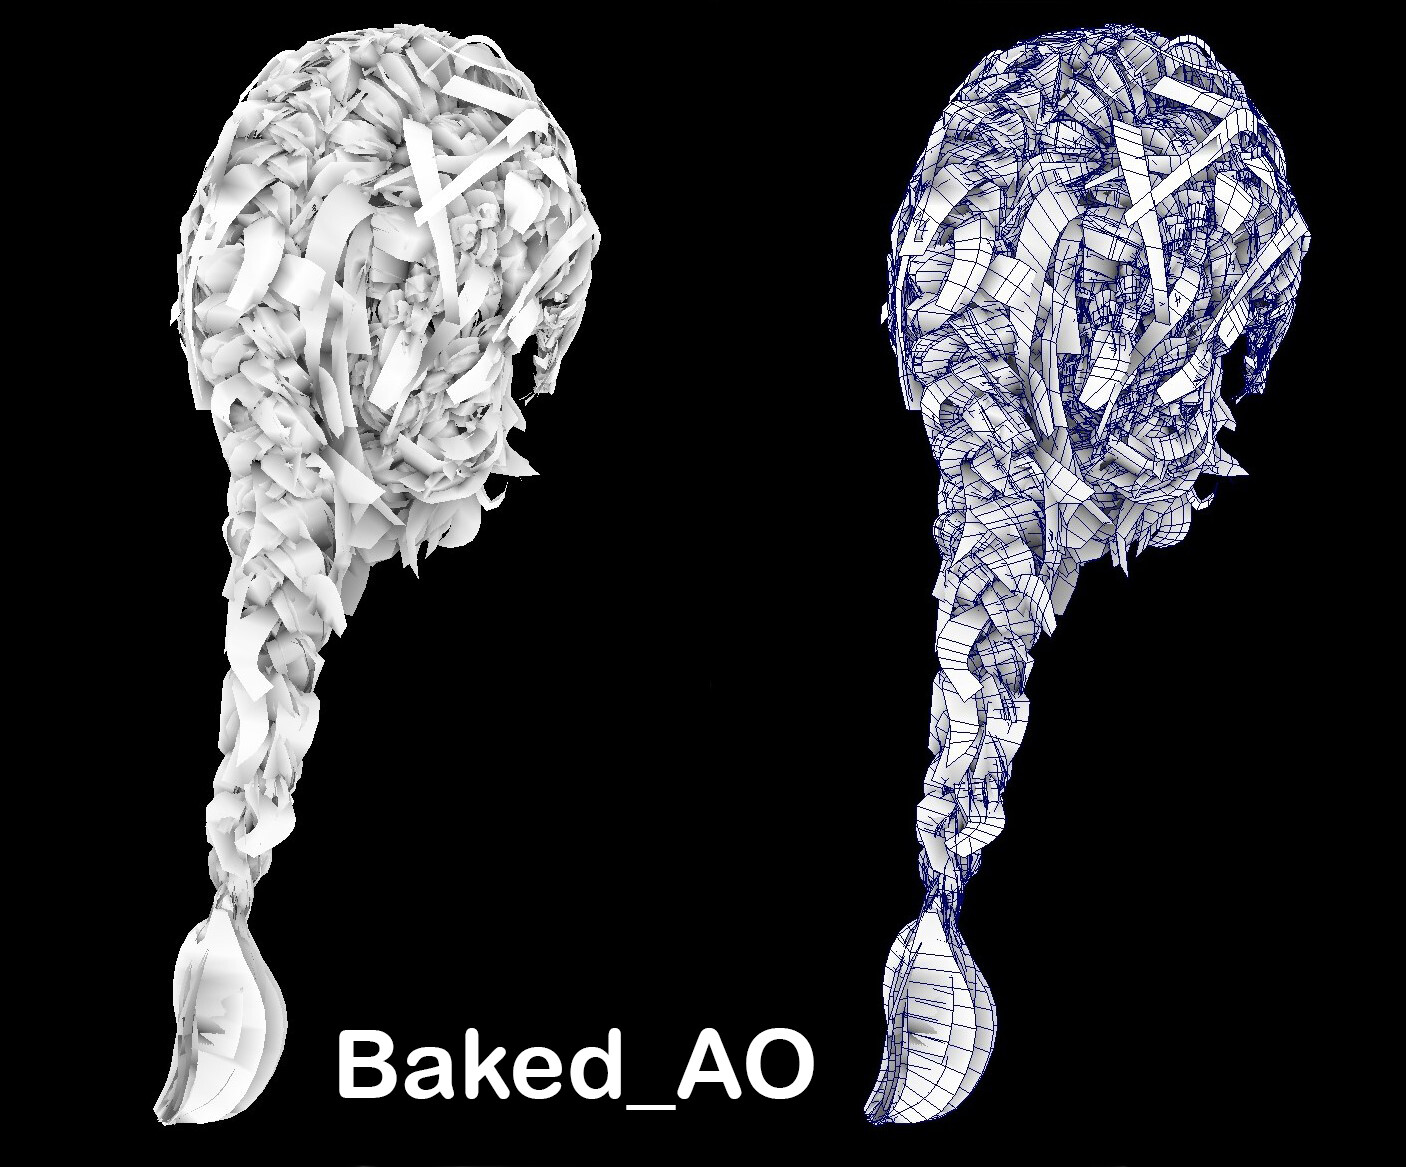 Baked the AO Information to the vertexes. You can paint or bake using 3d package